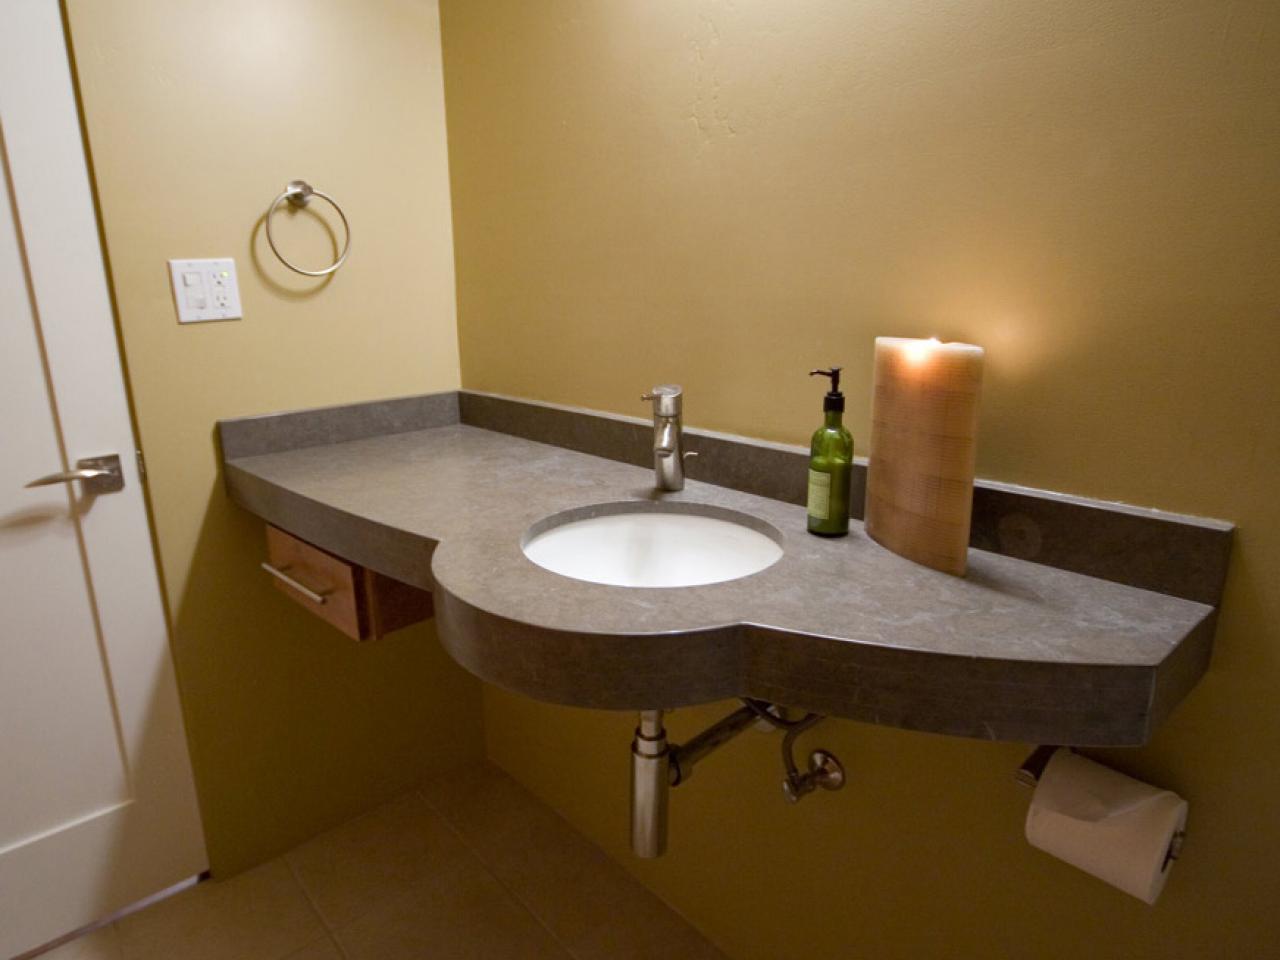 Wall Mount Sinks, Wall Mount Sinks For Small Bathrooms